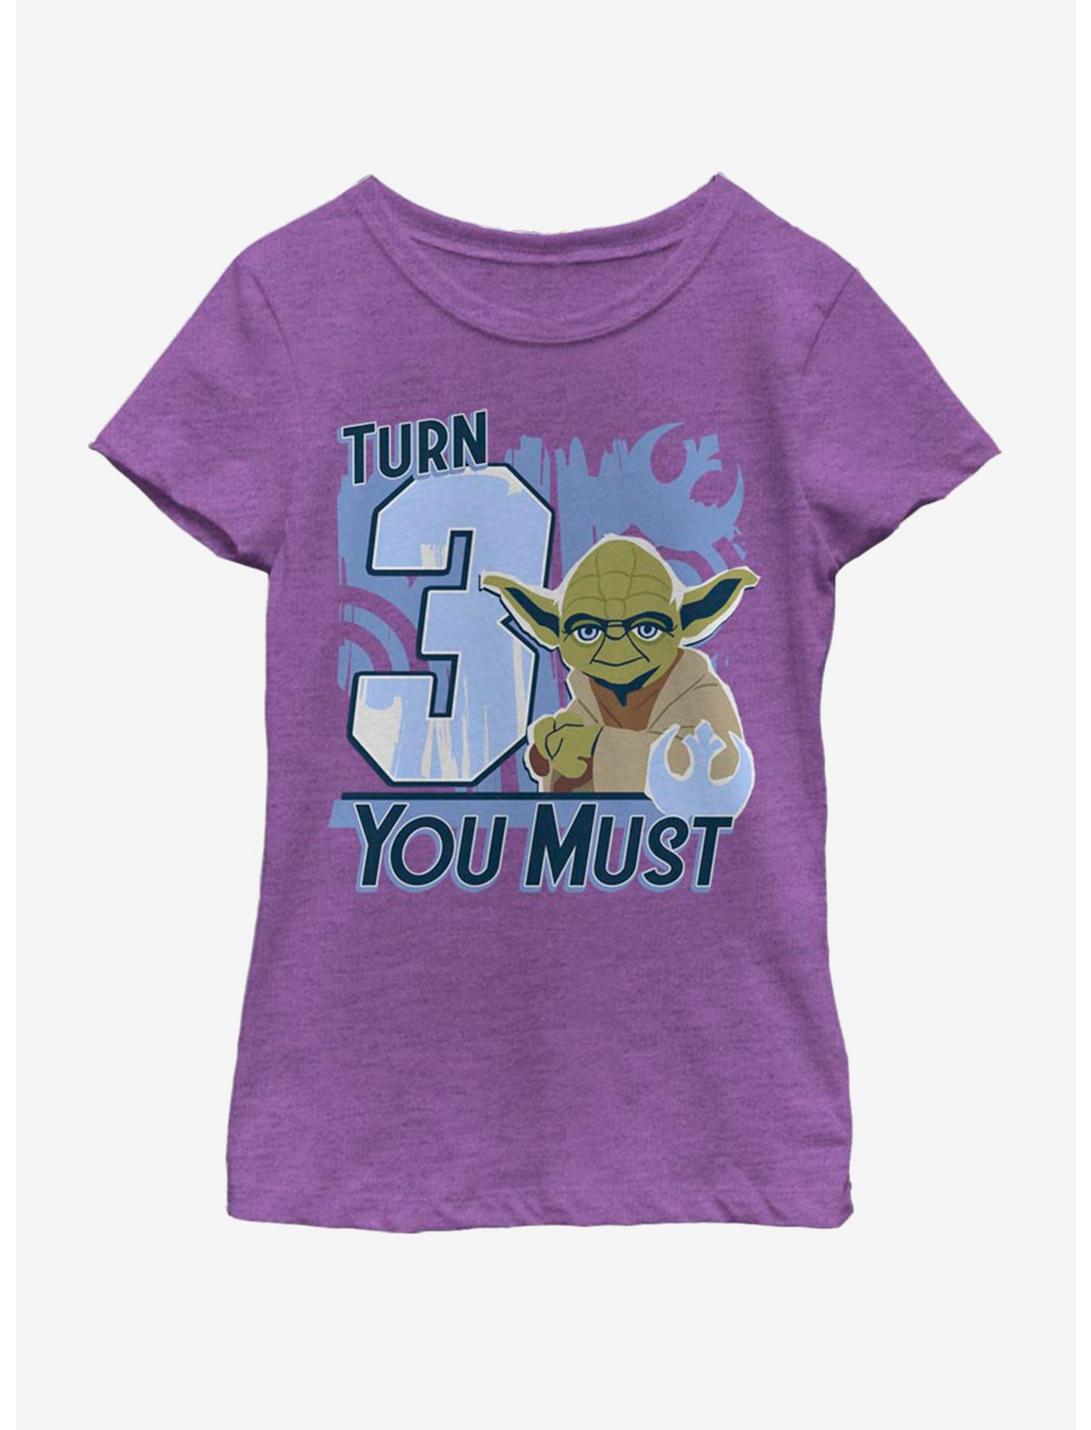 Star Wars Turn 3 You Must Youth Girls T-Shirt, PURPLE BERRY, hi-res